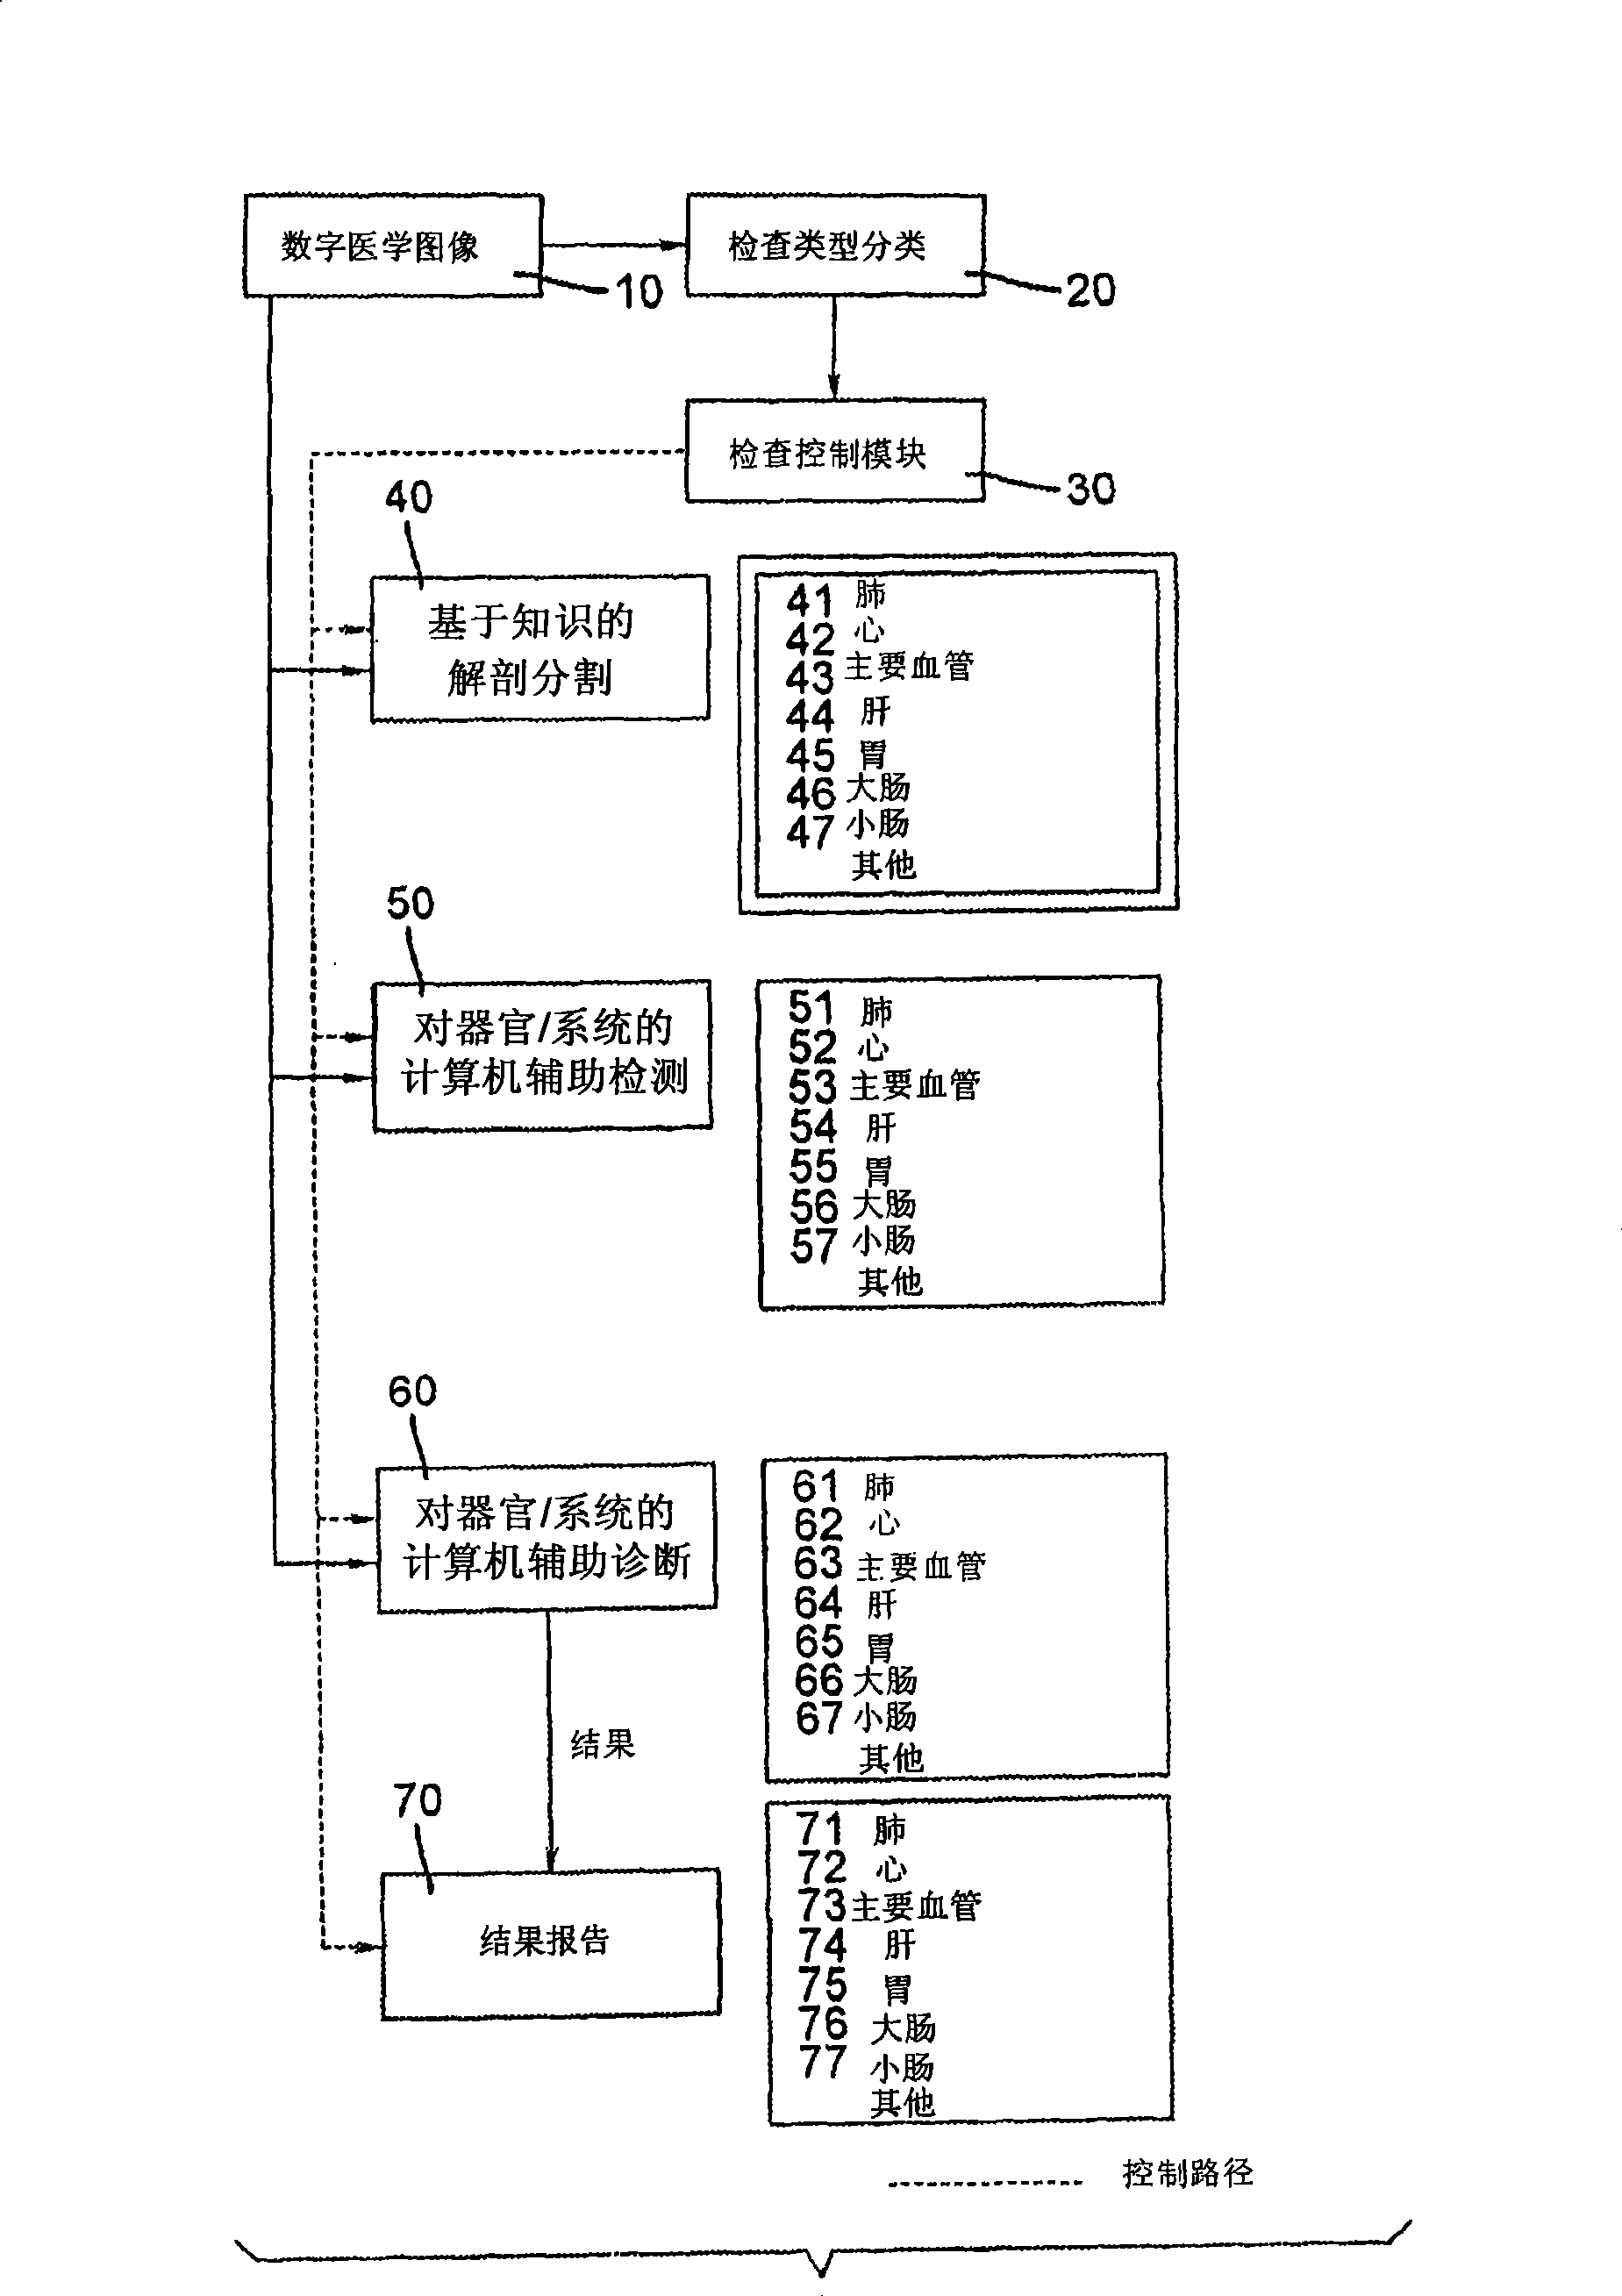 Cad detection system for multiple organ systems